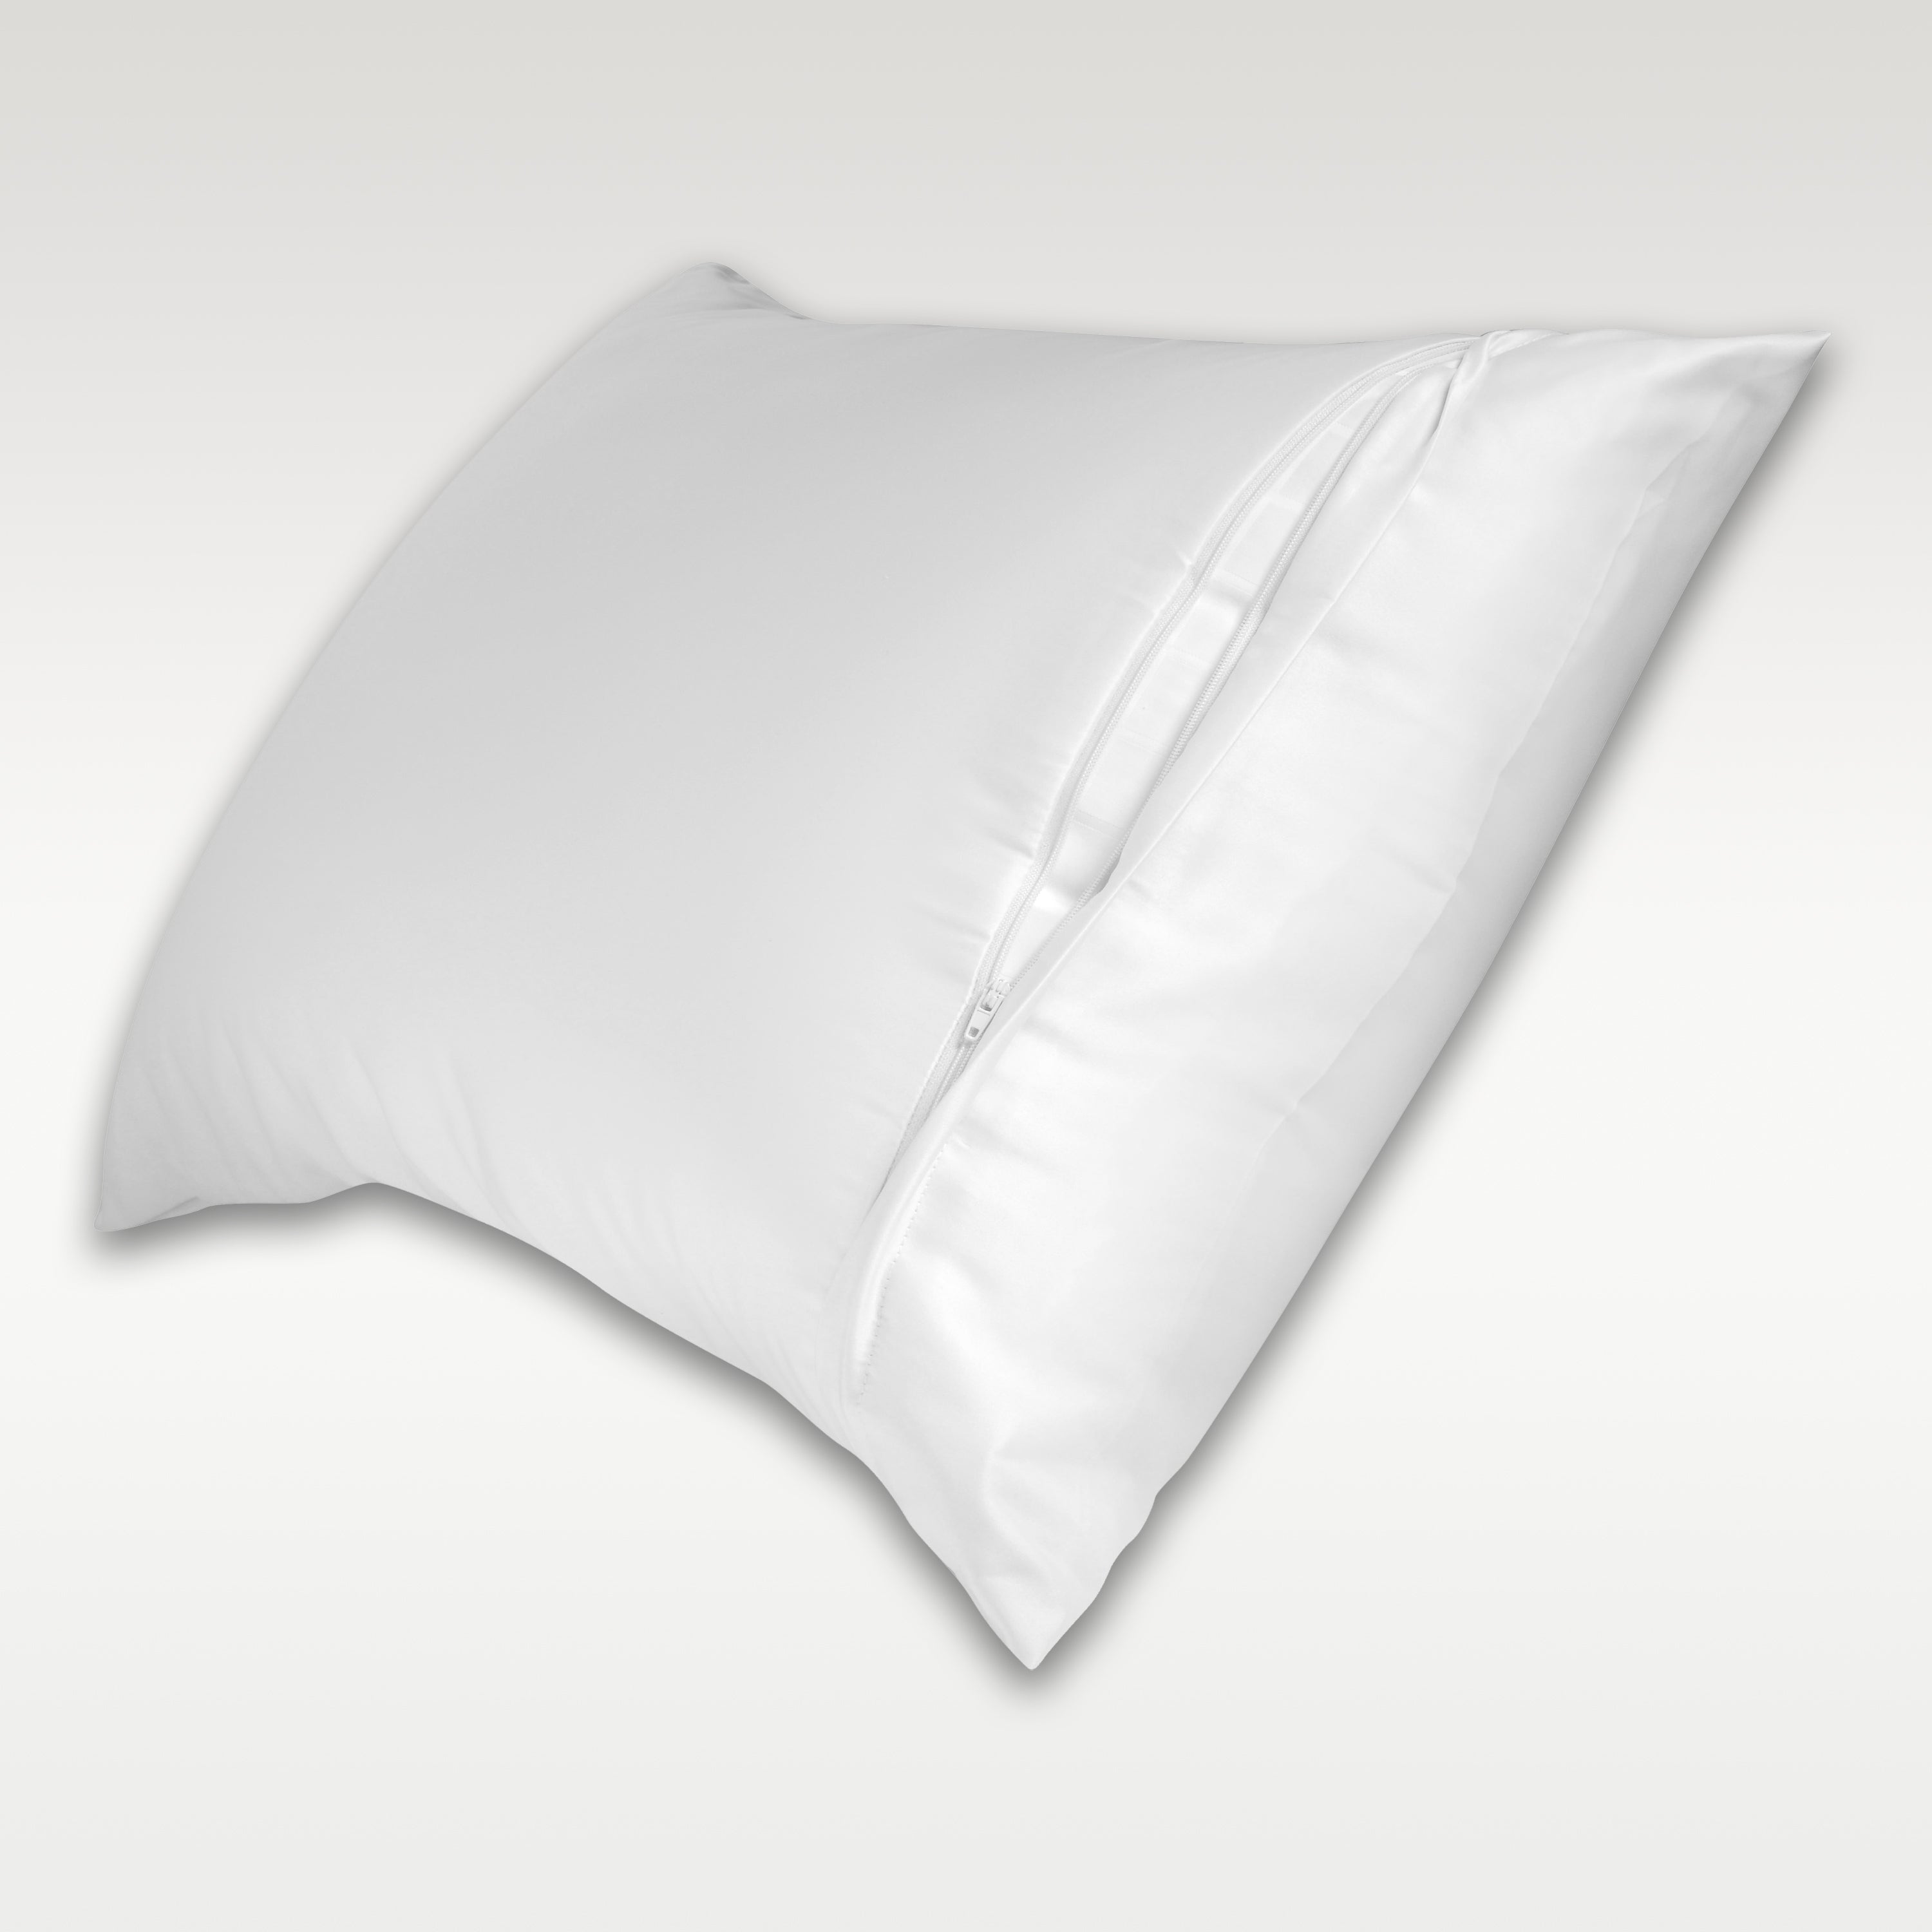 Pillow Protectors Stock Photos and Images - 123RF